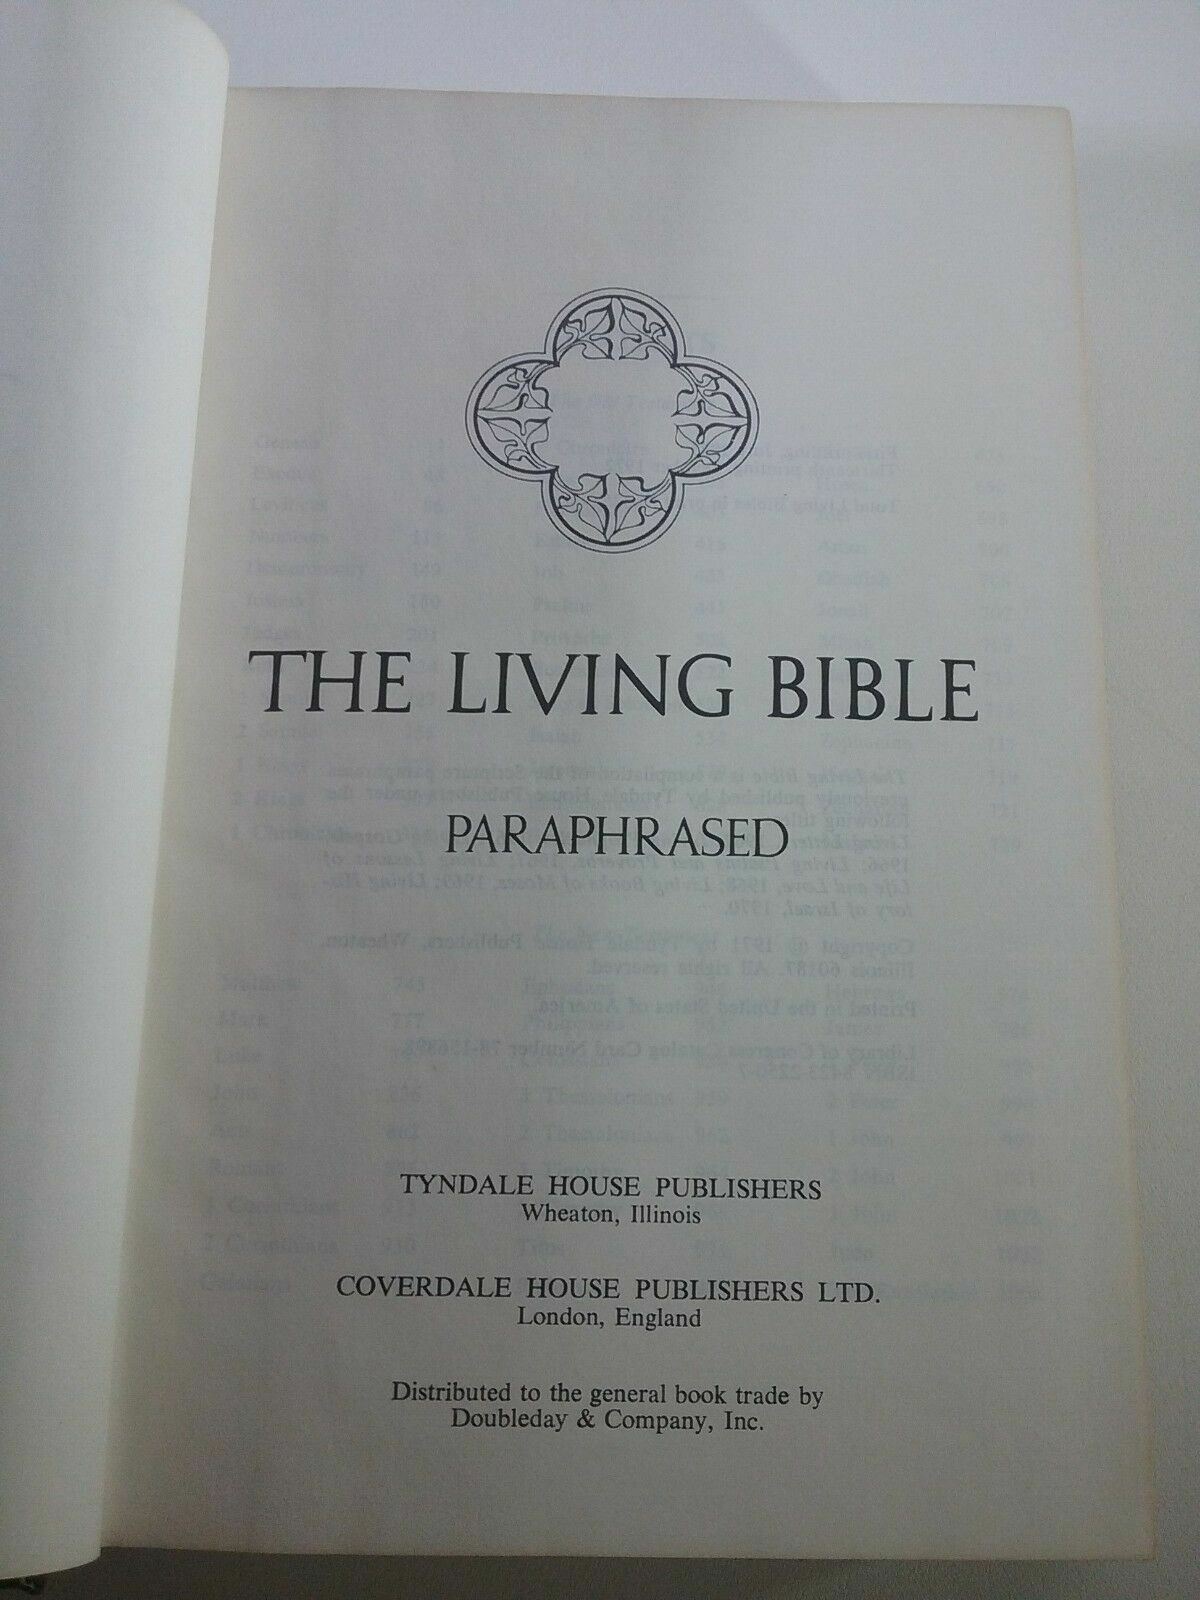 Living Bible Paraphrased Tyndale ISBN: 842322507 Hardcover 1972 13th Printing